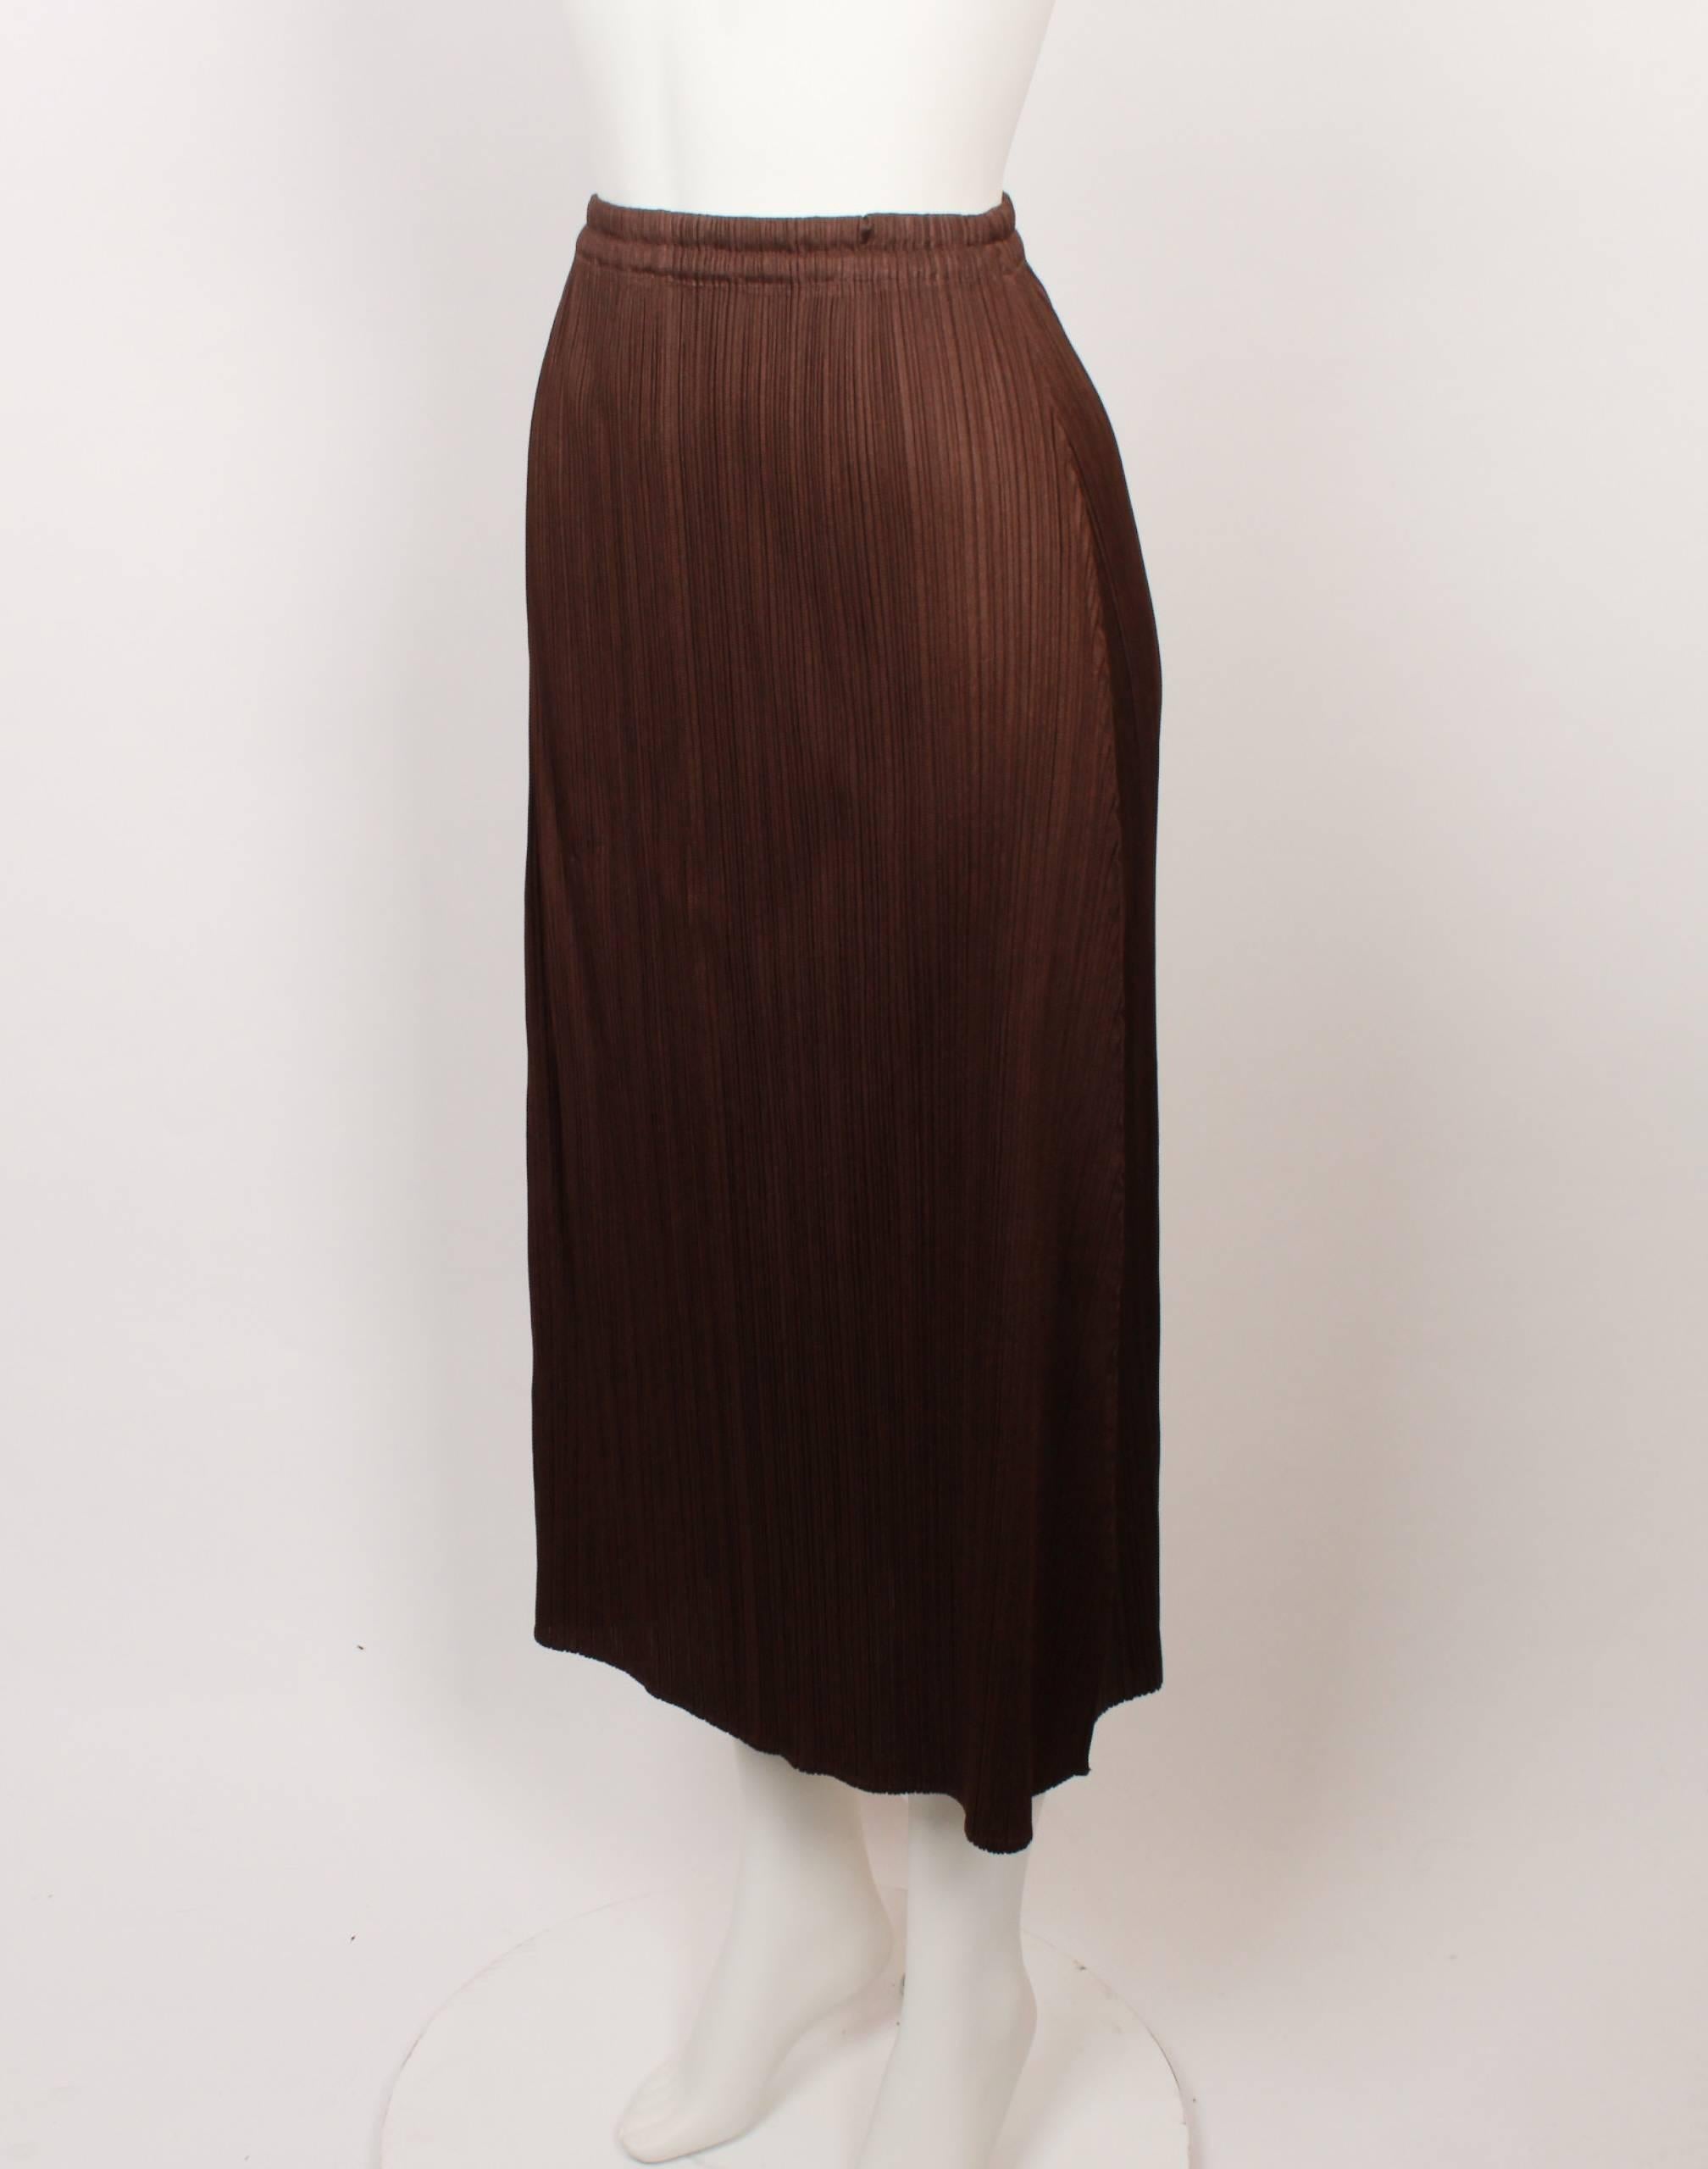 1990s Issey Miyake 3/4 length brown pleated skirt with elasticated waist in iconic Issey Miyake pleats. 
Fabric is stretchy and measurements are with garment flat and un-stretched. 
